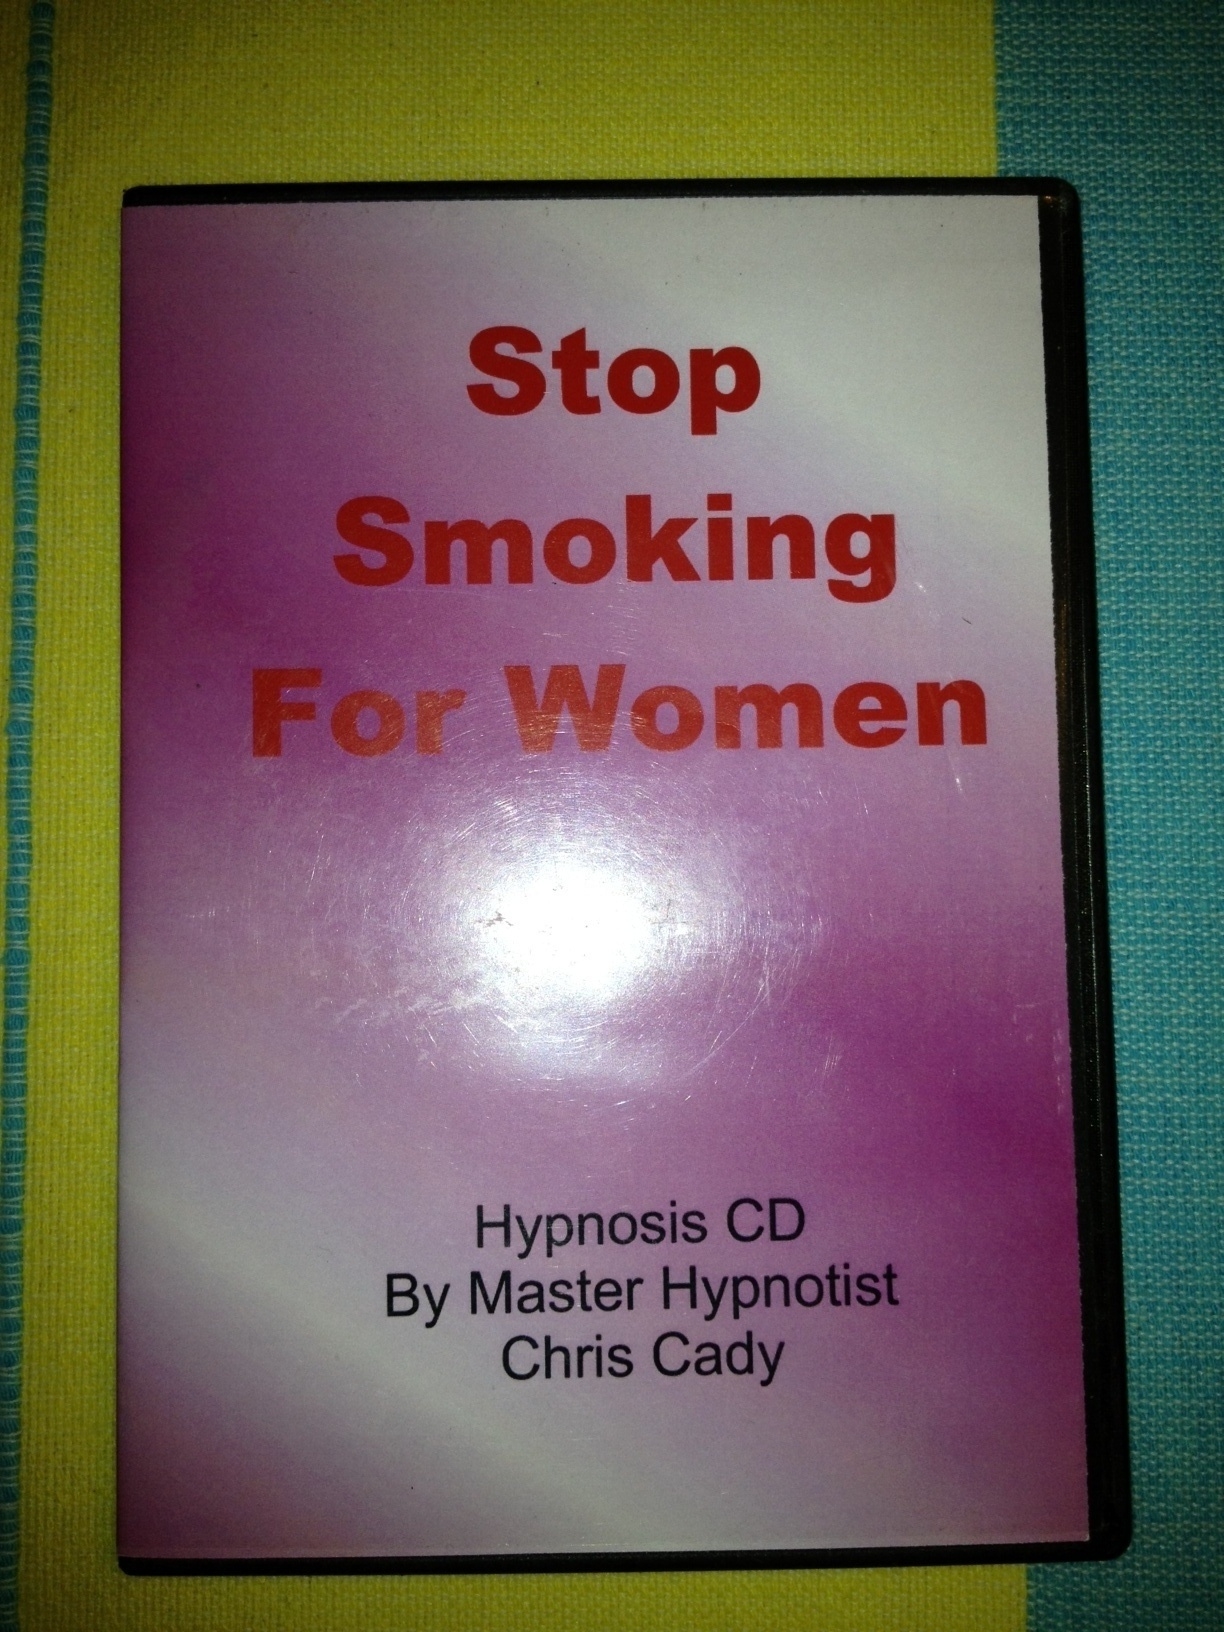 stop smoking for women with hypnosis hypnotherapy Chris Cady